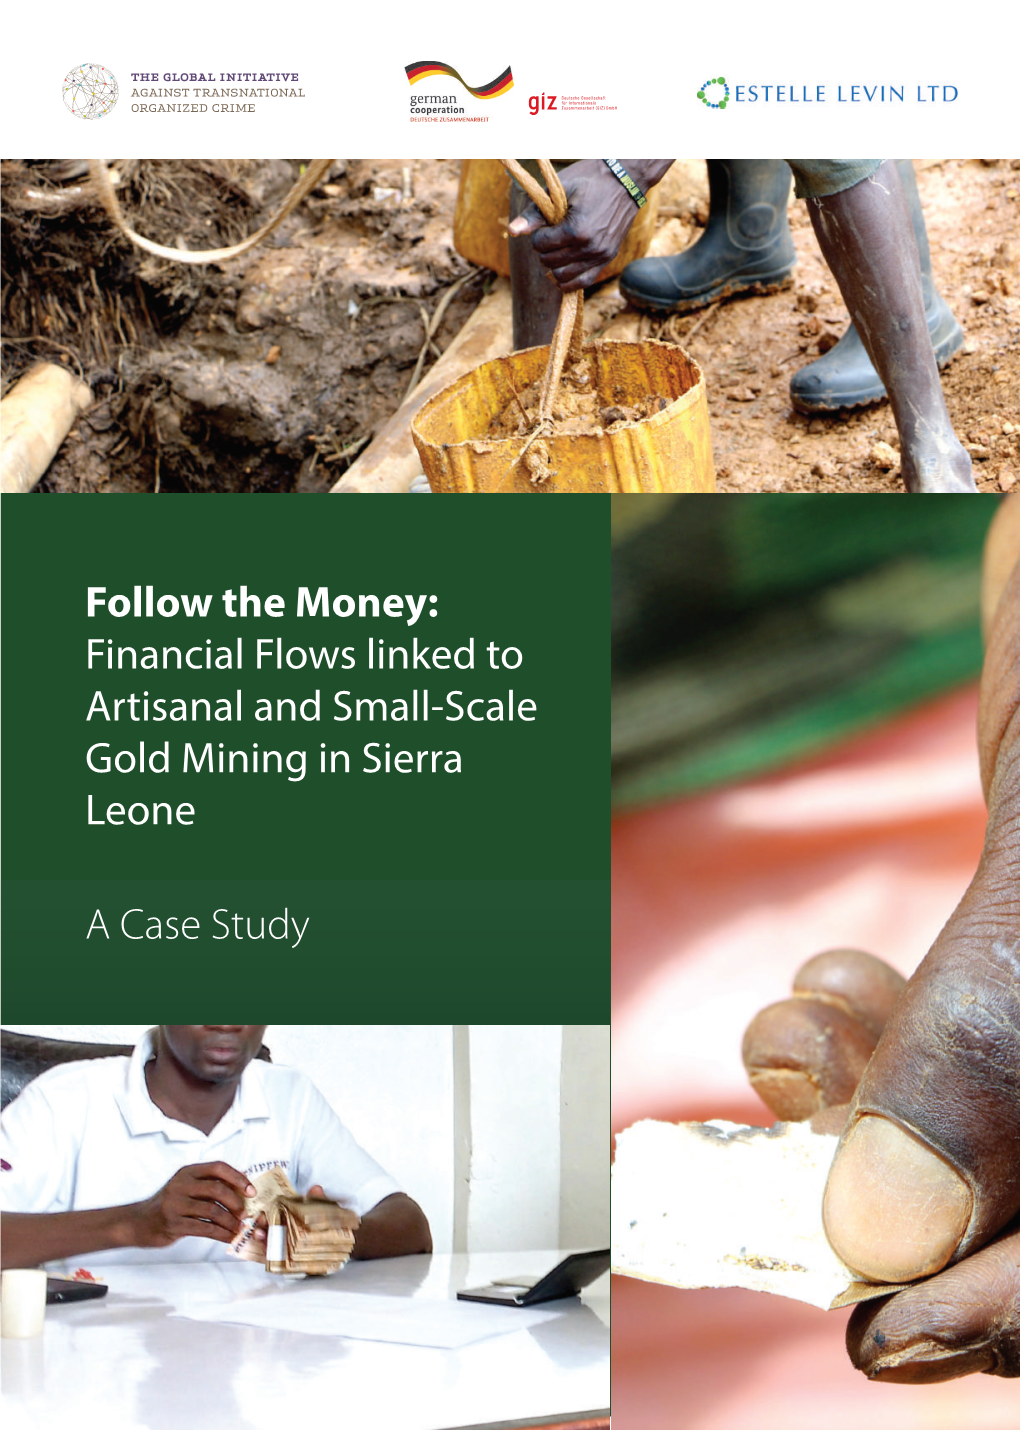 Follow the Money: Financial Flows Linked to Artisanal and Small-Scale Gold Mining in Sierra Leone a Case Study